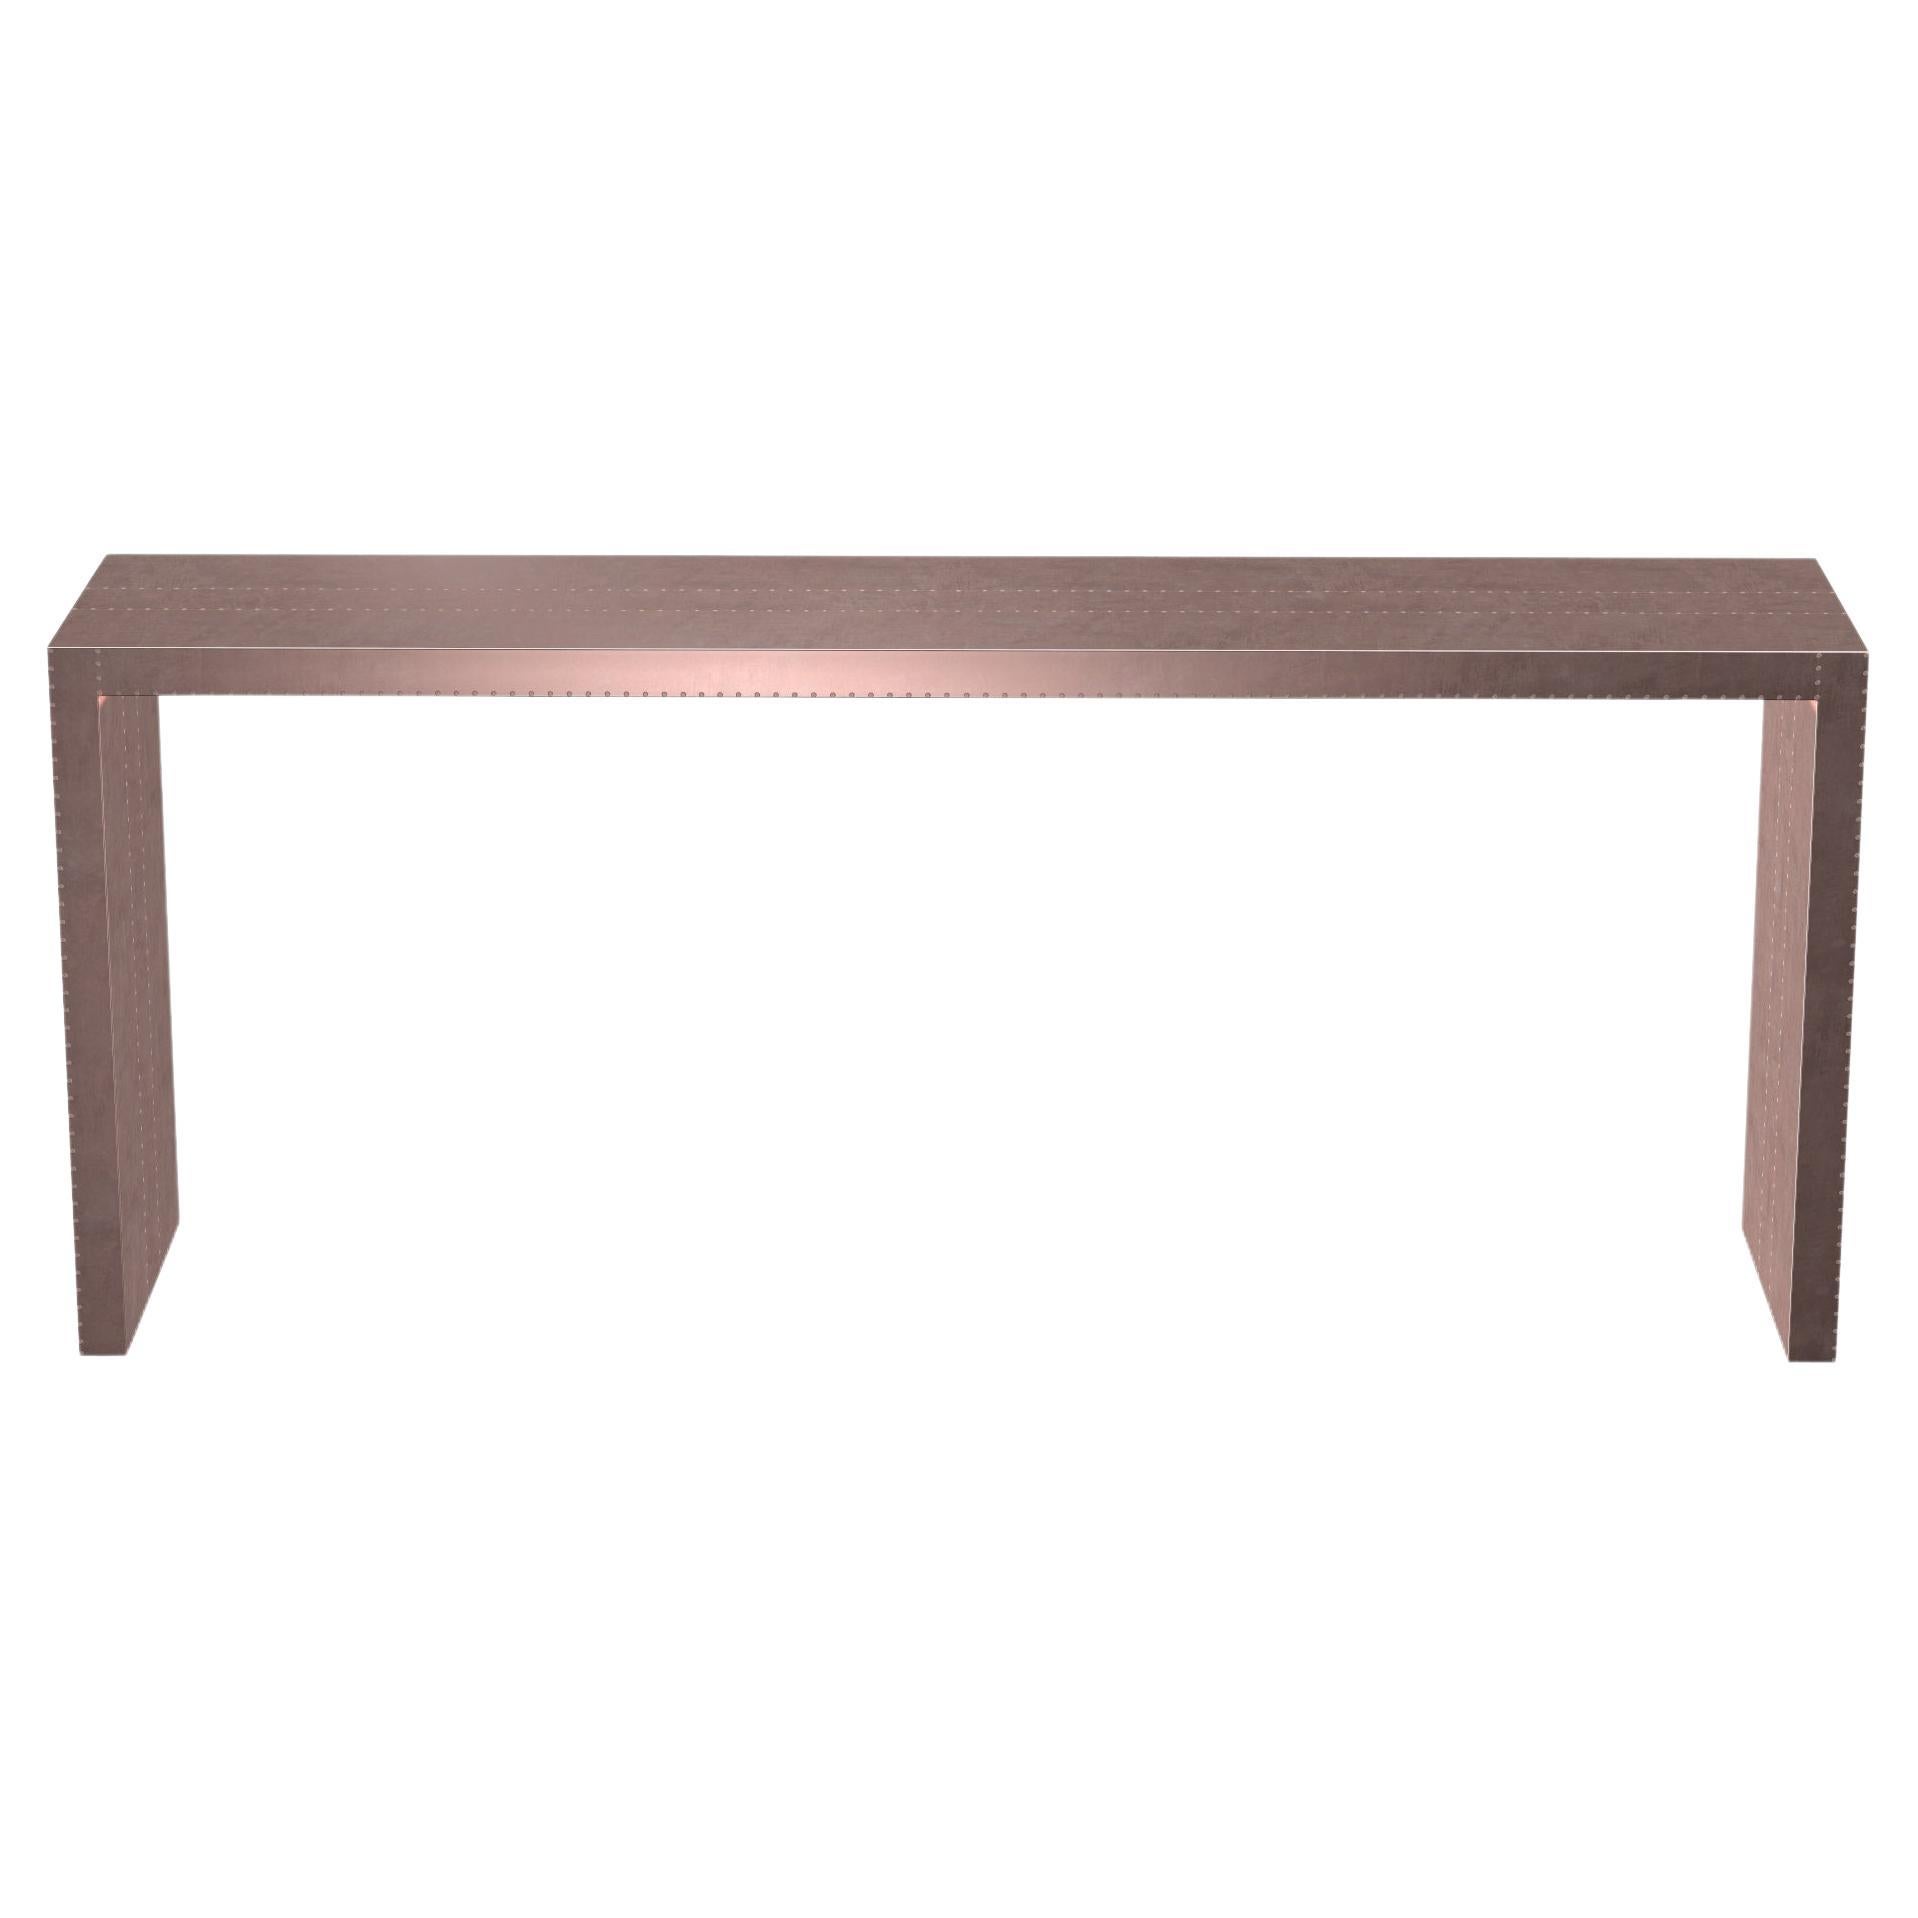 Art Deco Rectangular Console Tables Smooth Copper by Alison Spear for S. Odegard For Sale